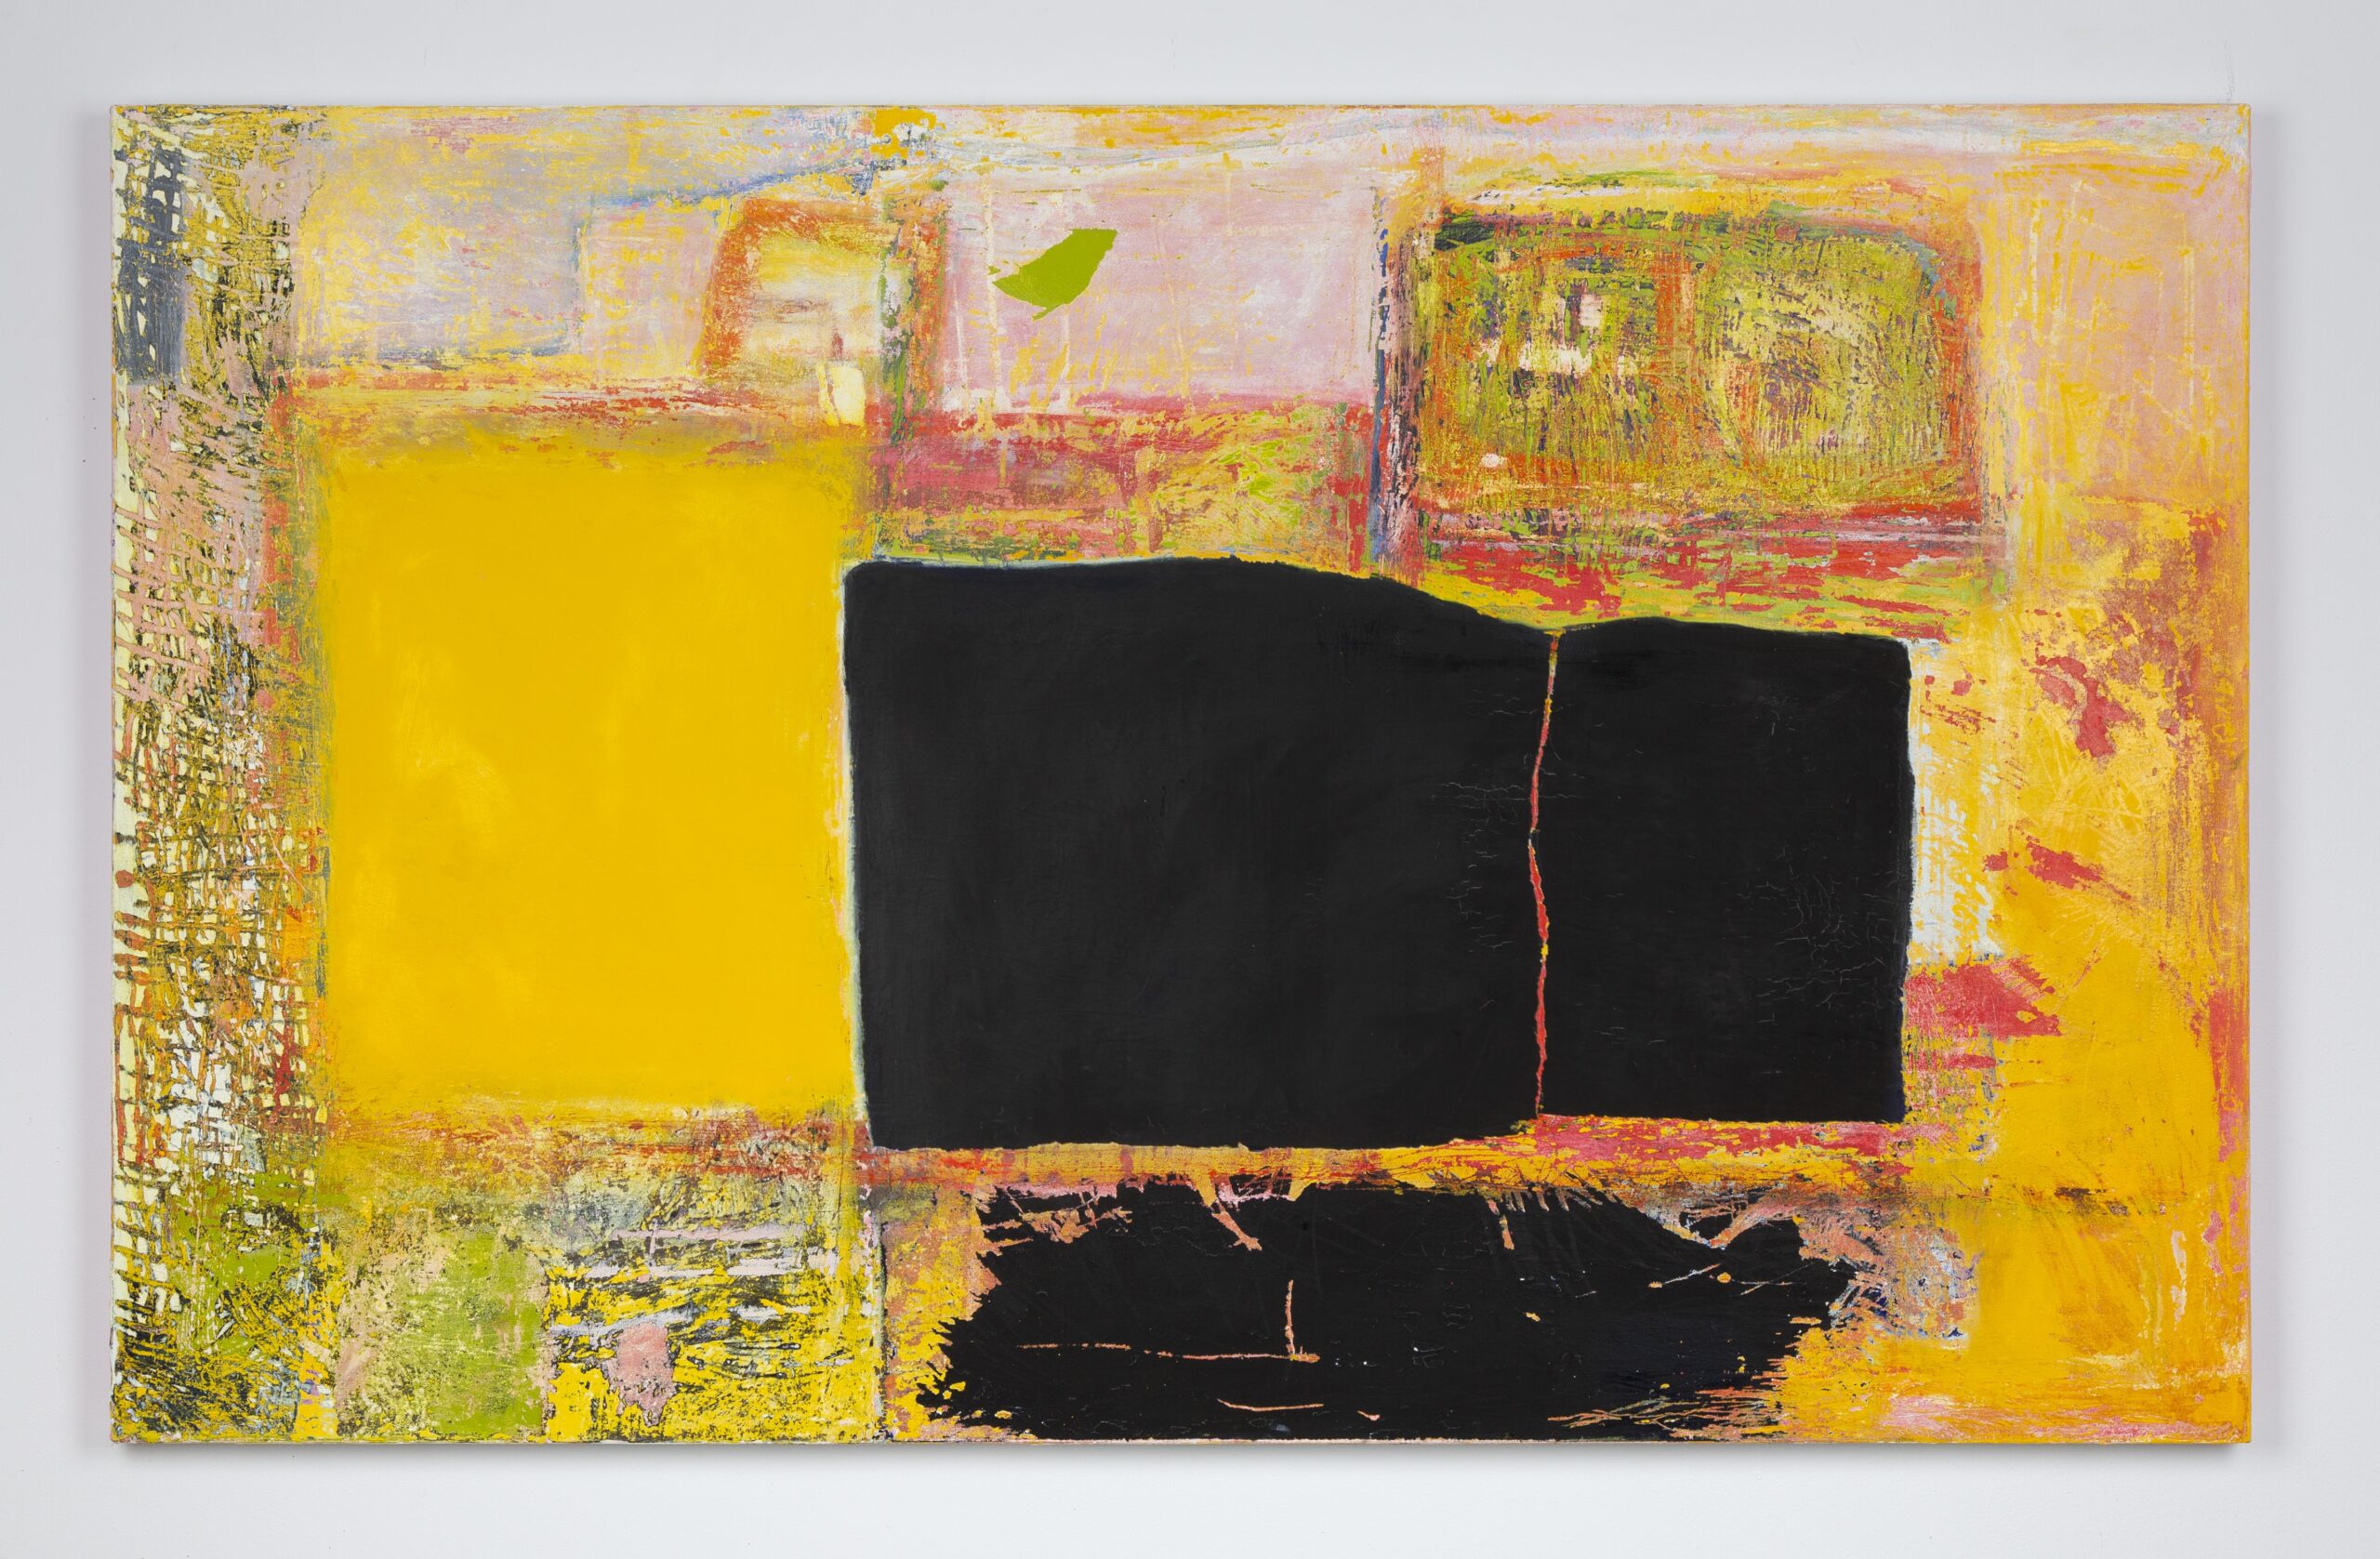 painting by nikki terry, with yellow and black abstract cubes, painted with authentic strokes and quality